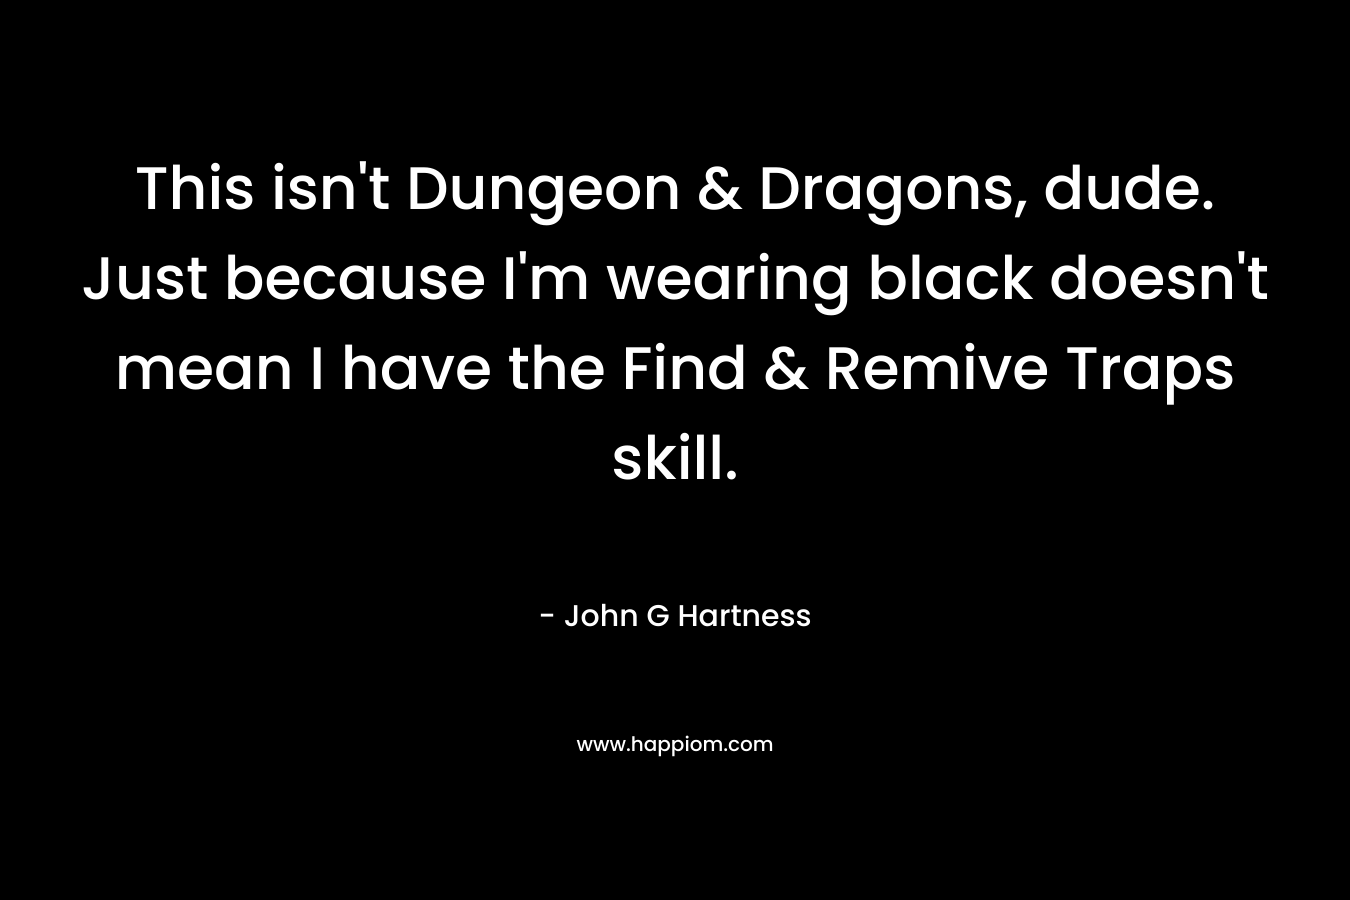 This isn't Dungeon & Dragons, dude. Just because I'm wearing black doesn't mean I have the Find & Remive Traps skill.